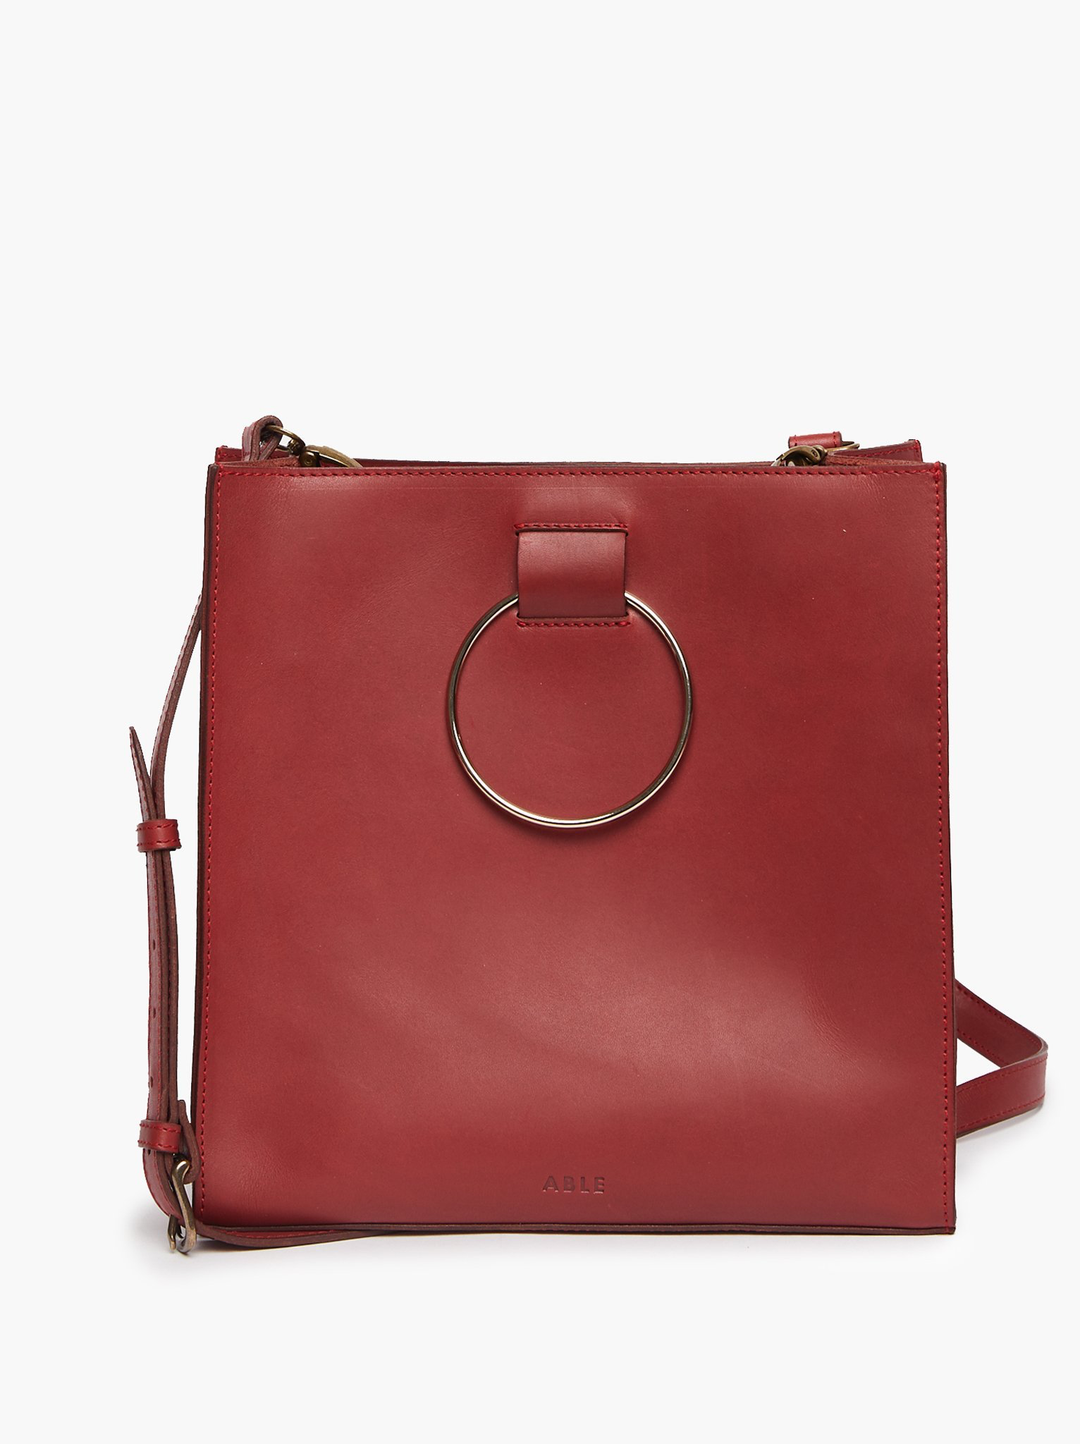 Fozi Tote - Brick Red - Kingfisher Road - Online Boutique